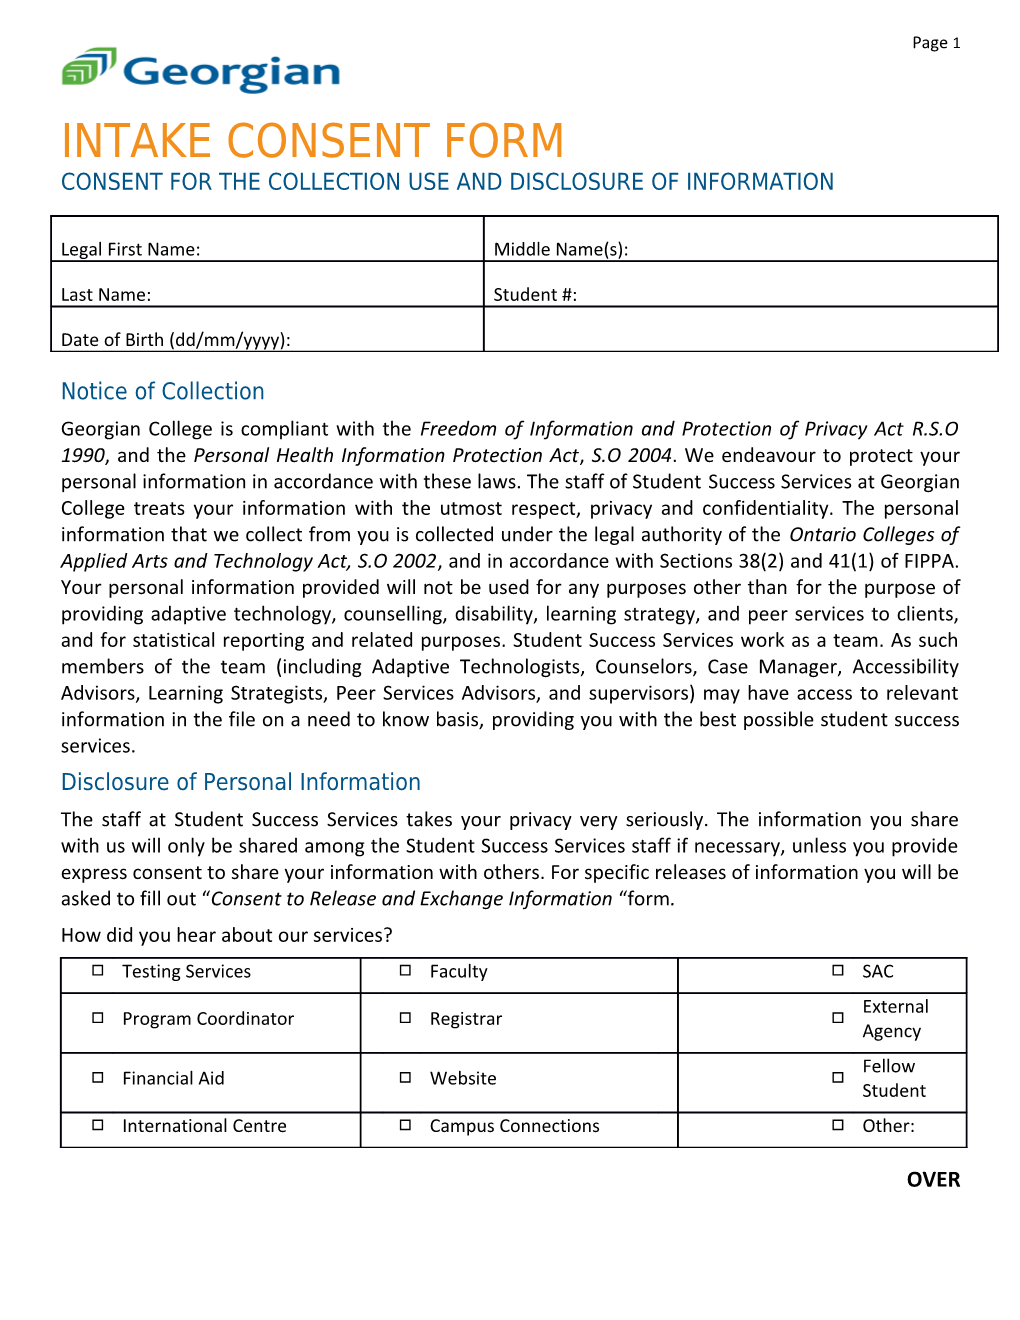 Consent for the Collection Use and Disclosure of Information